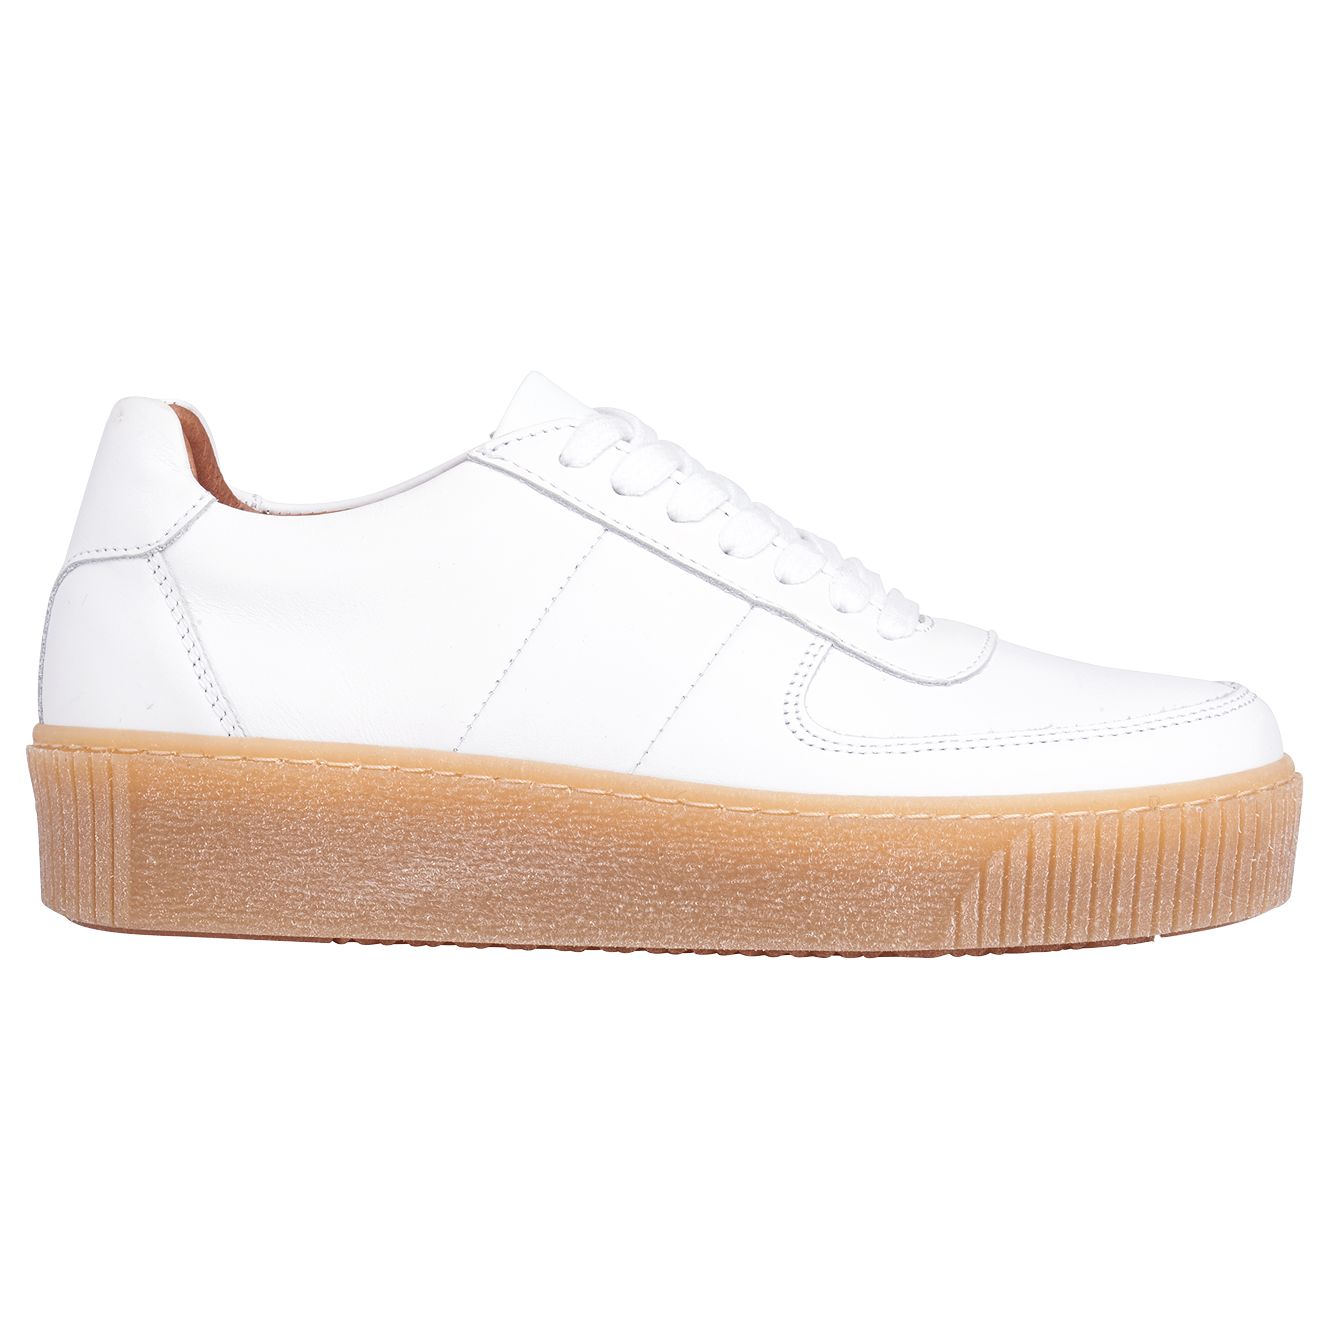 Whistles Abbey Lace Up Trainers, White